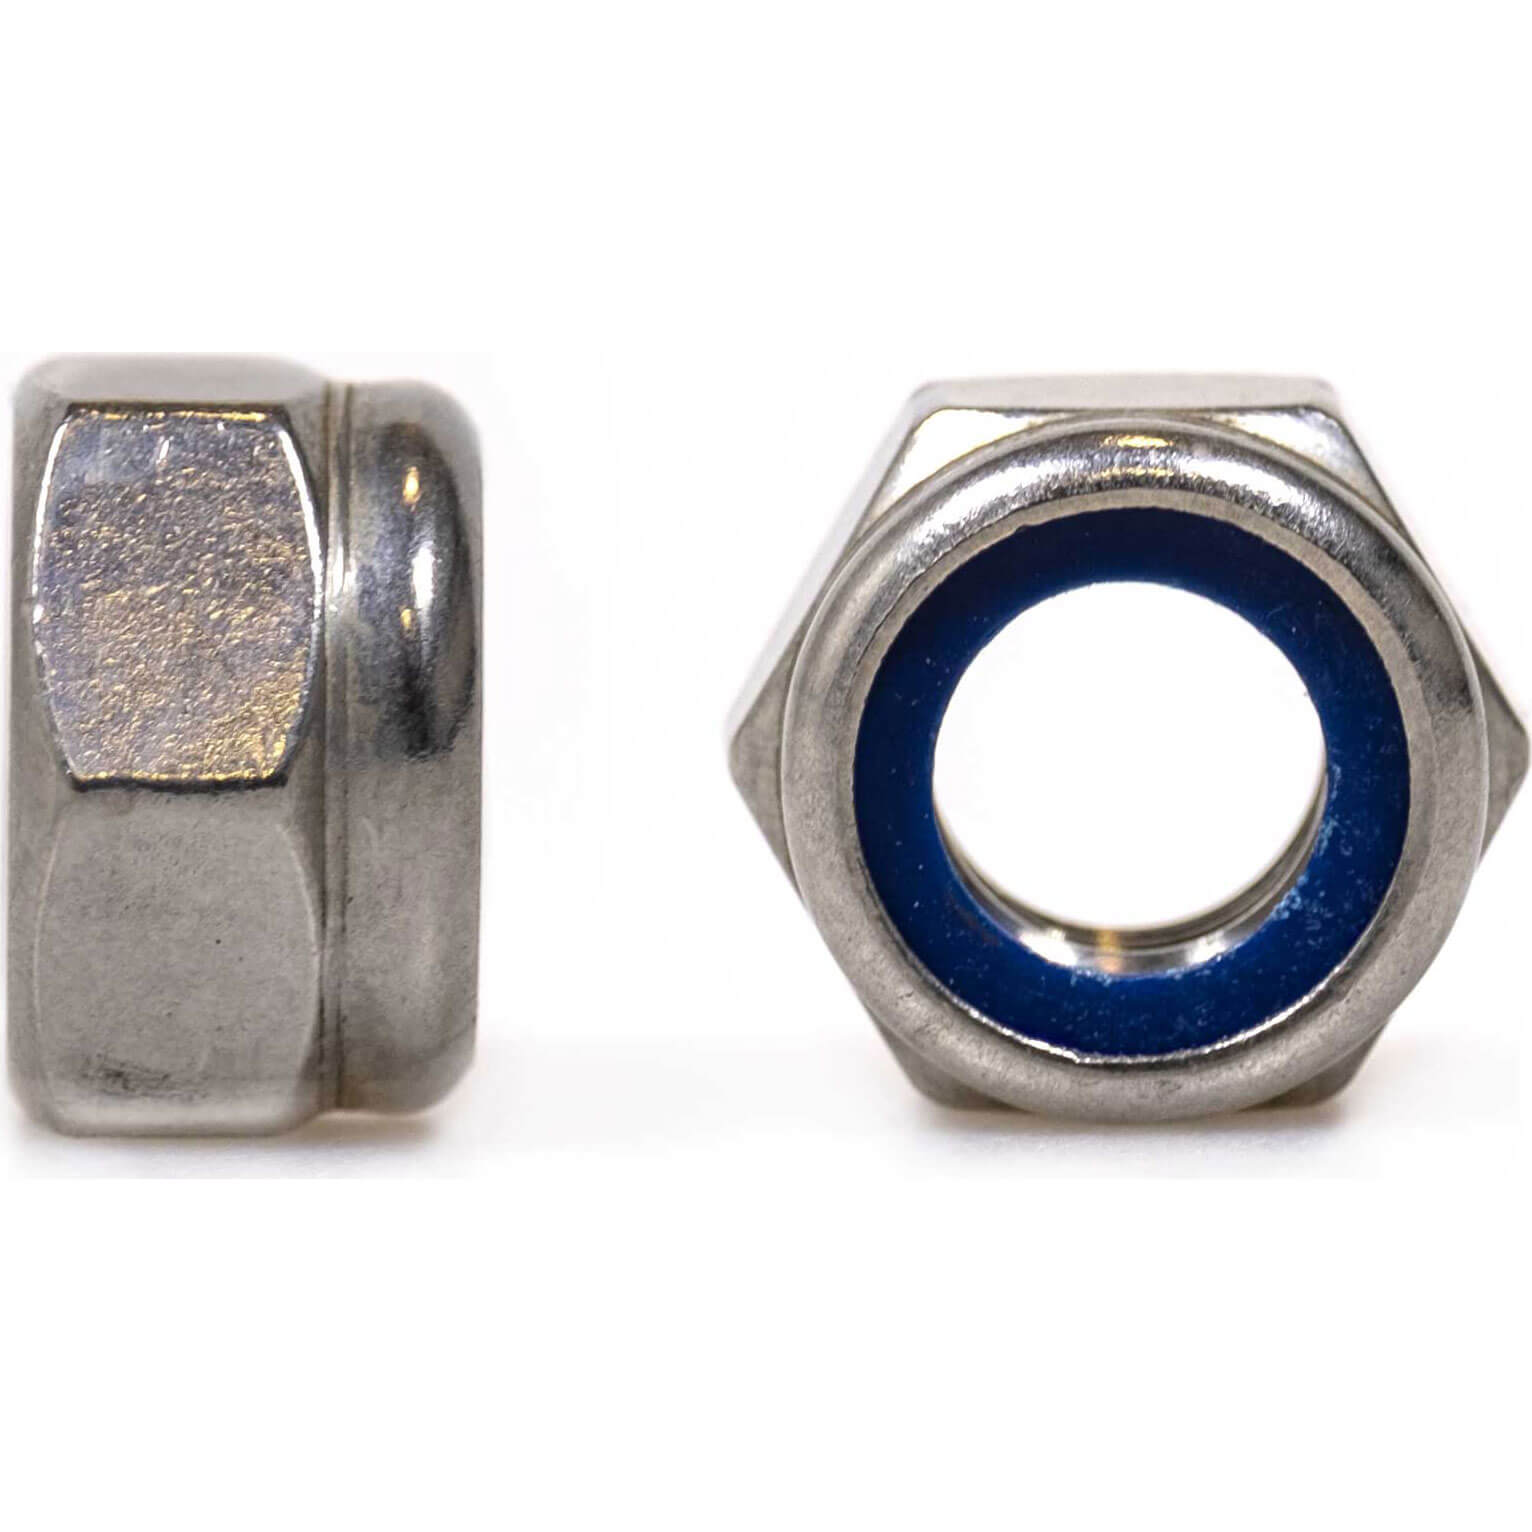 Image of Sirius A2 304 Stainless Steel Hexagon Lock Nuts M8